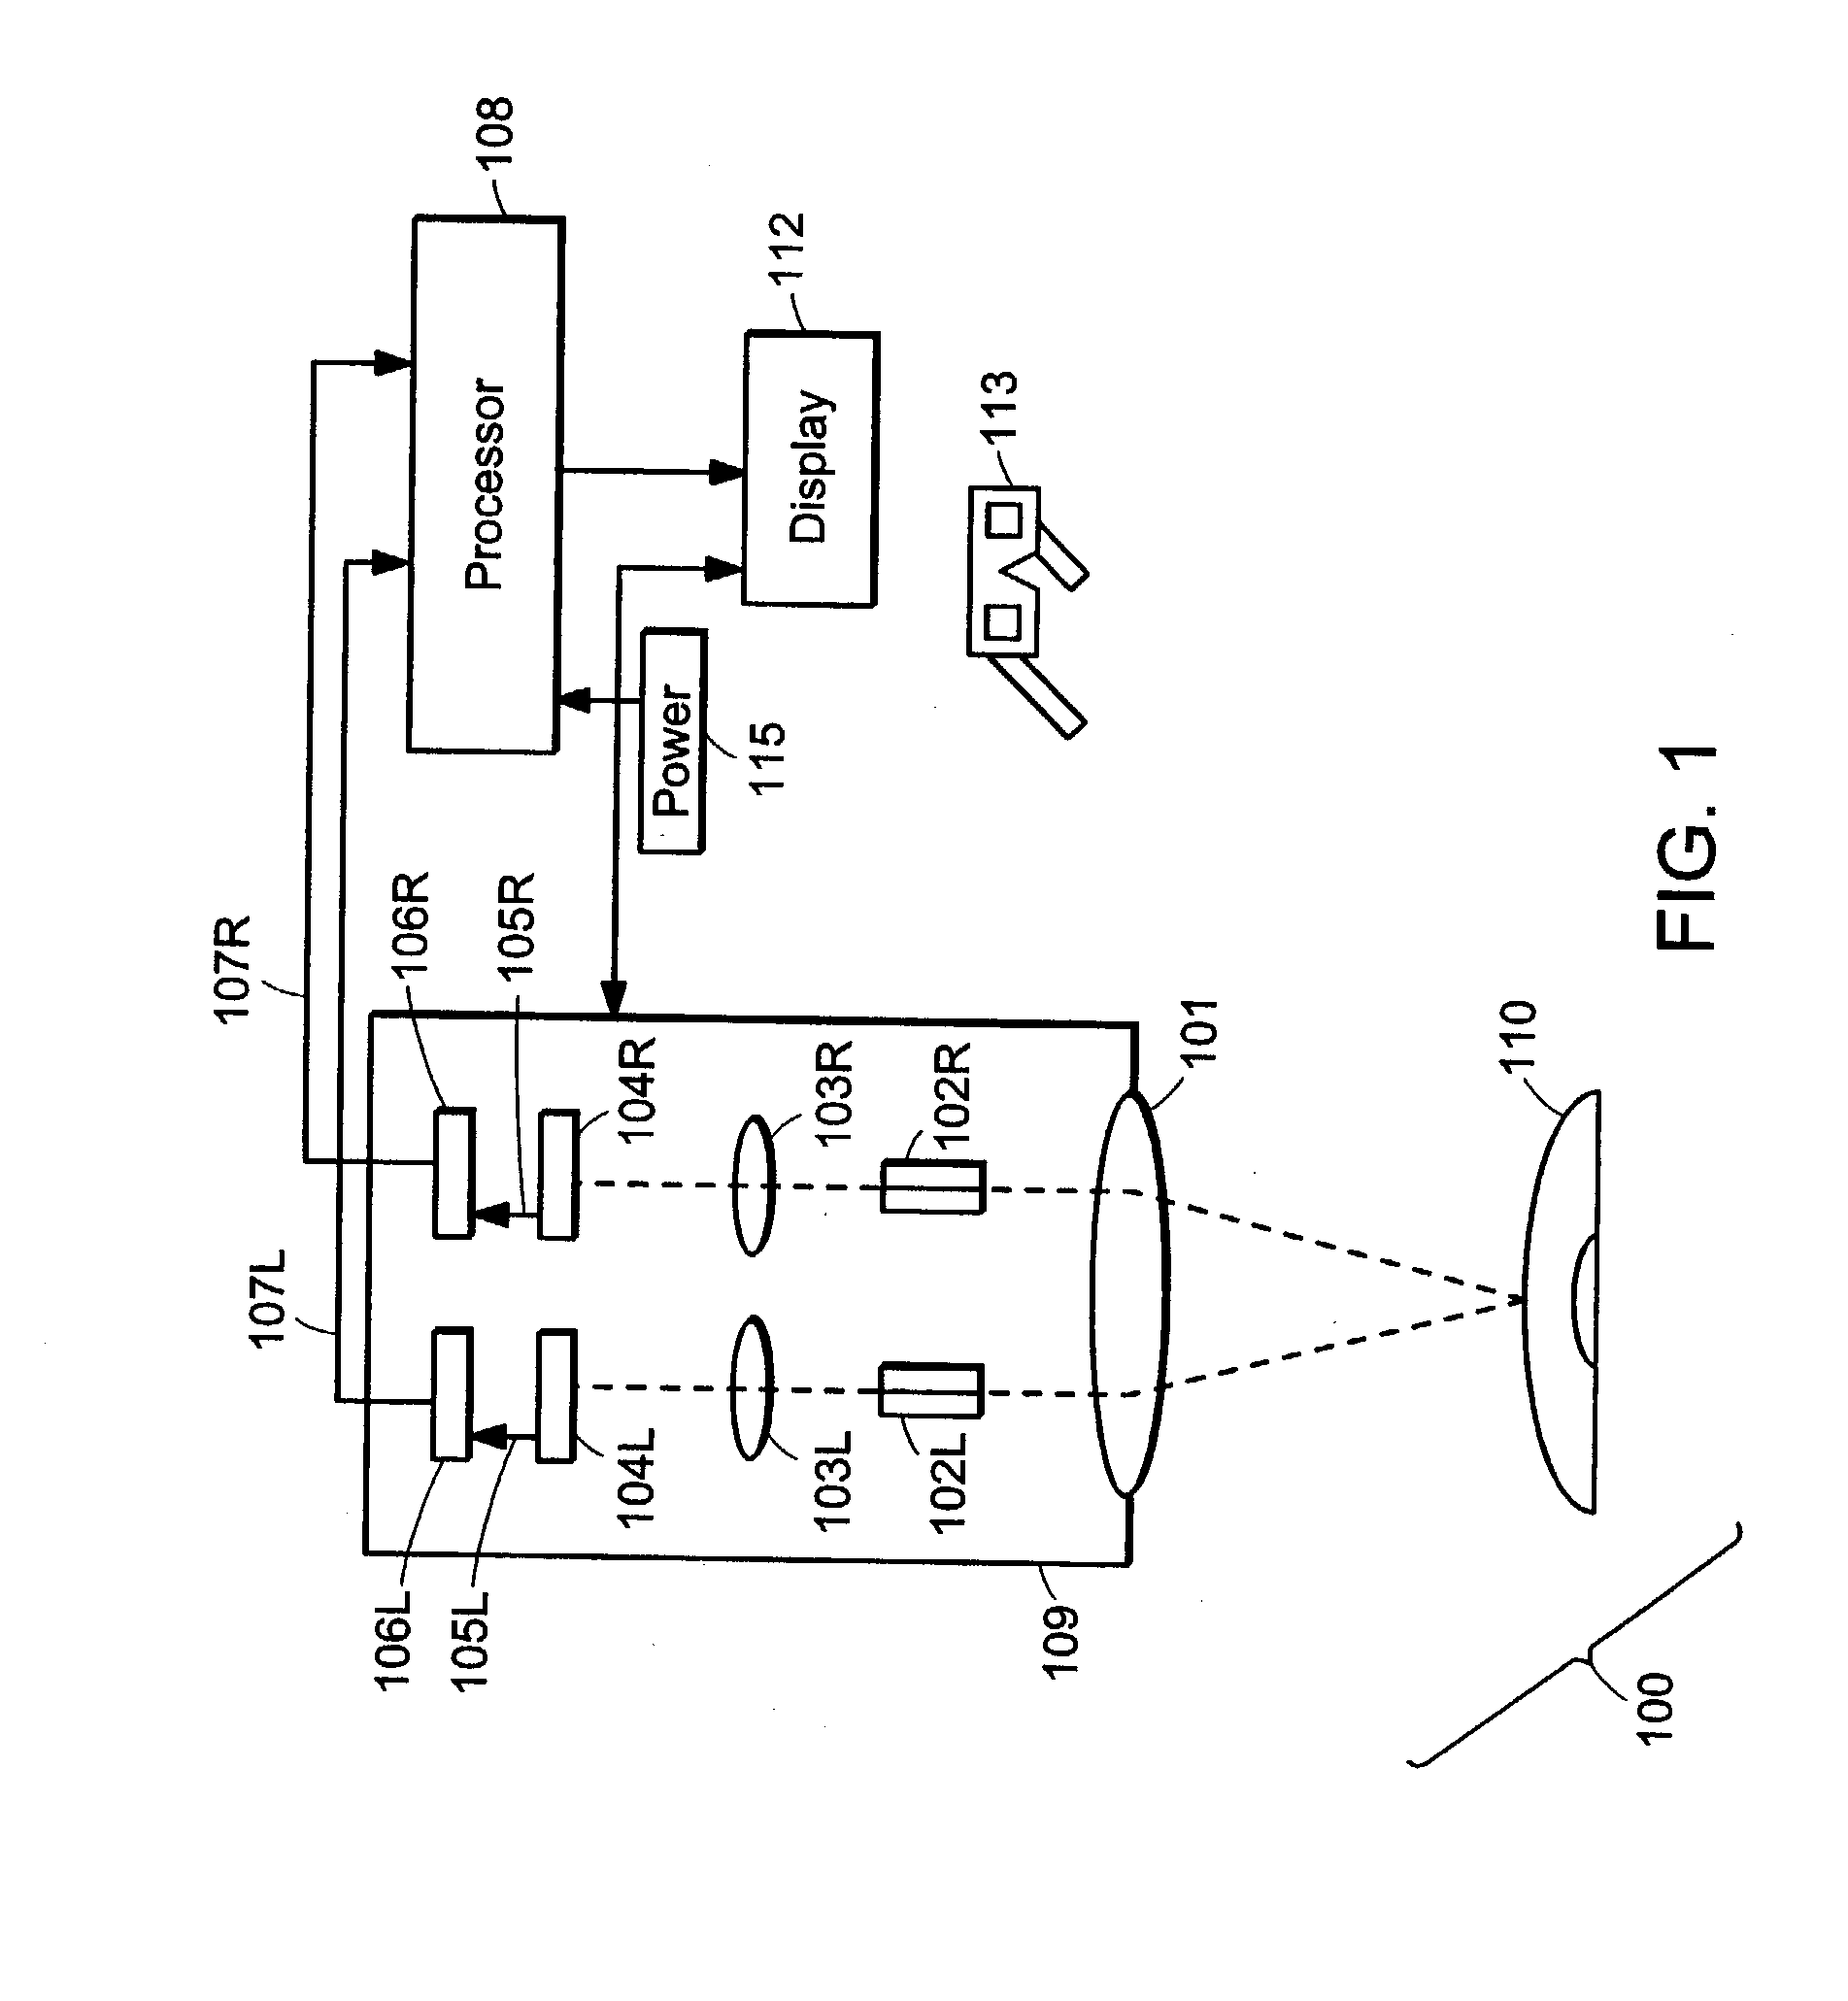 System and method of providing visual documentation during surgery